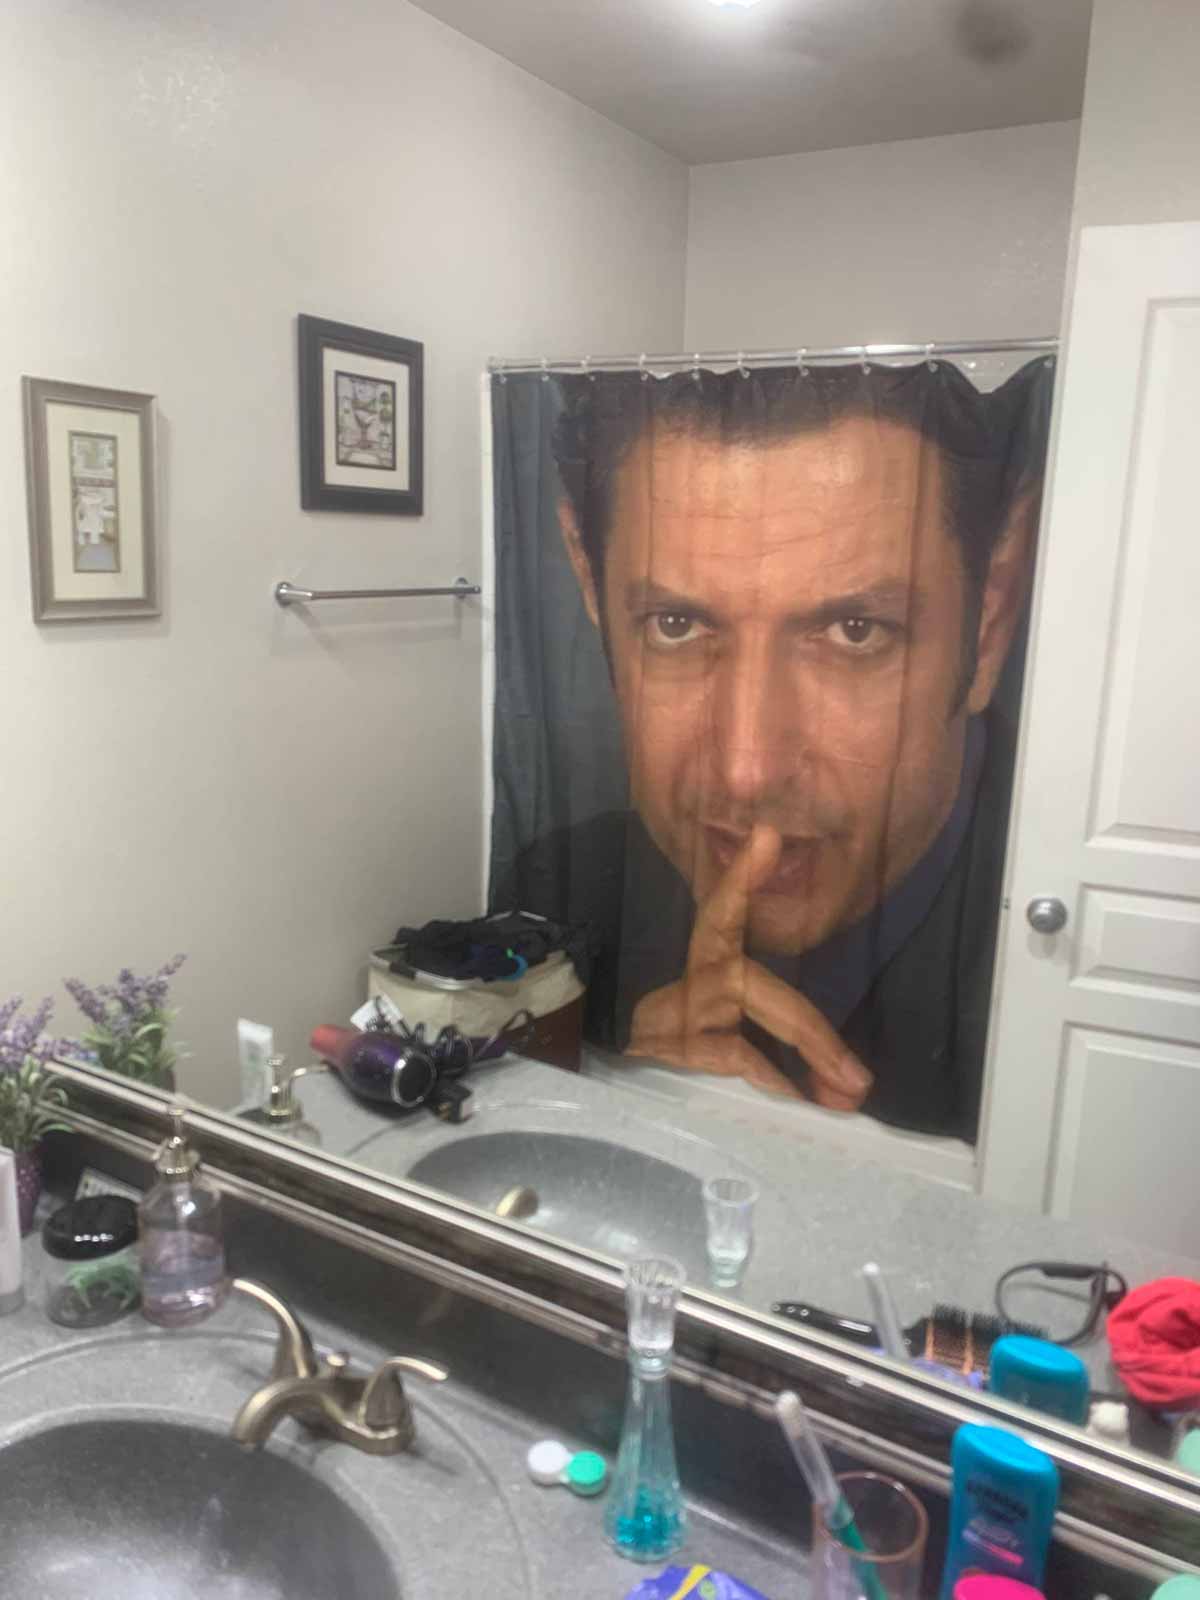 Jeff Goldbloom making the shhh gesture on a shower curtain